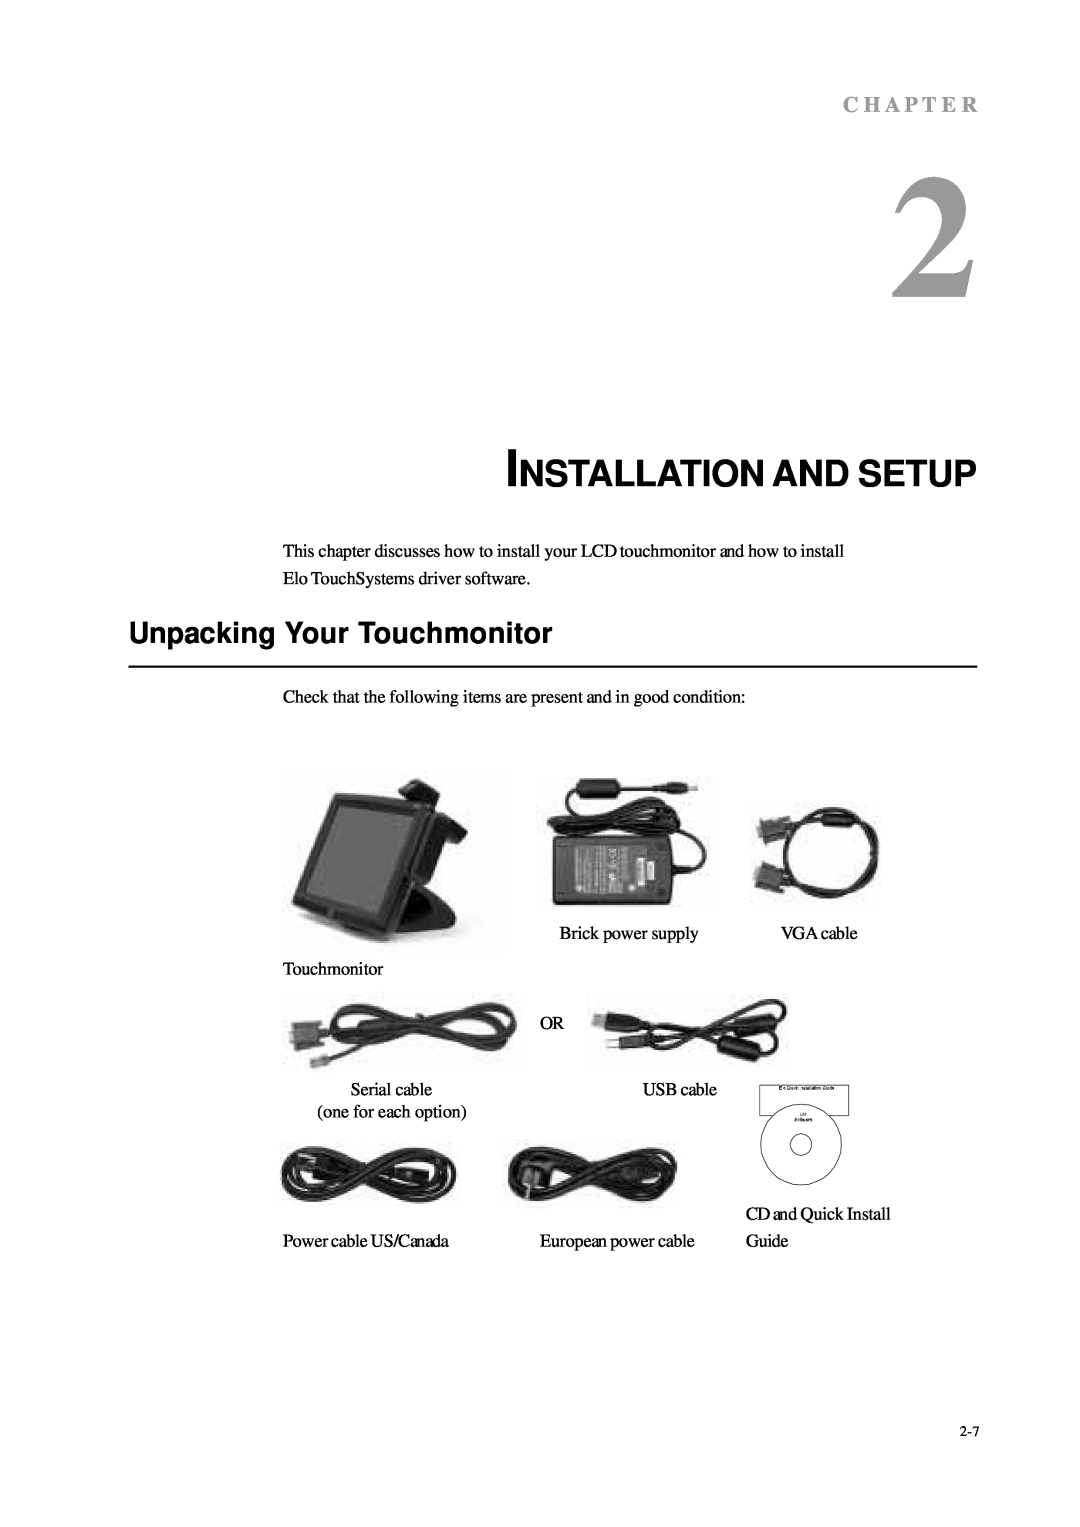 Tyco Electronics 1229L manual Installation And Setup, Unpacking Your Touchmonitor, C H A P T E R 